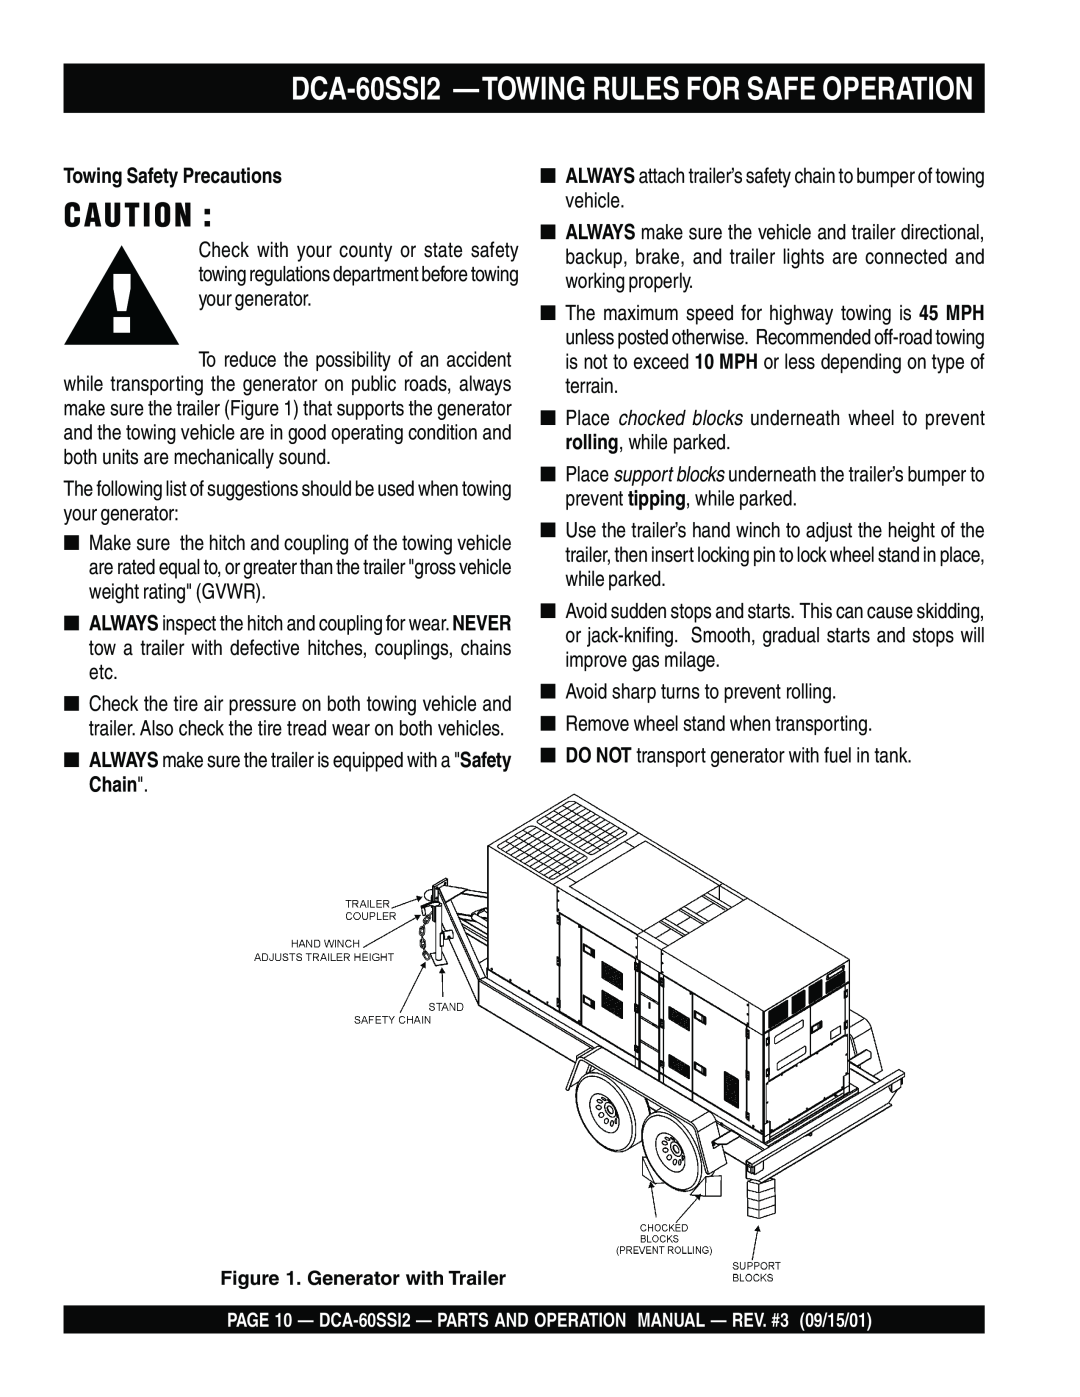 Multiquip DCA-60SS12 operation manual DCA-60SSI2 —TOWINGRULES FOR SAFE OPERATION, Towing Safety Precautions 